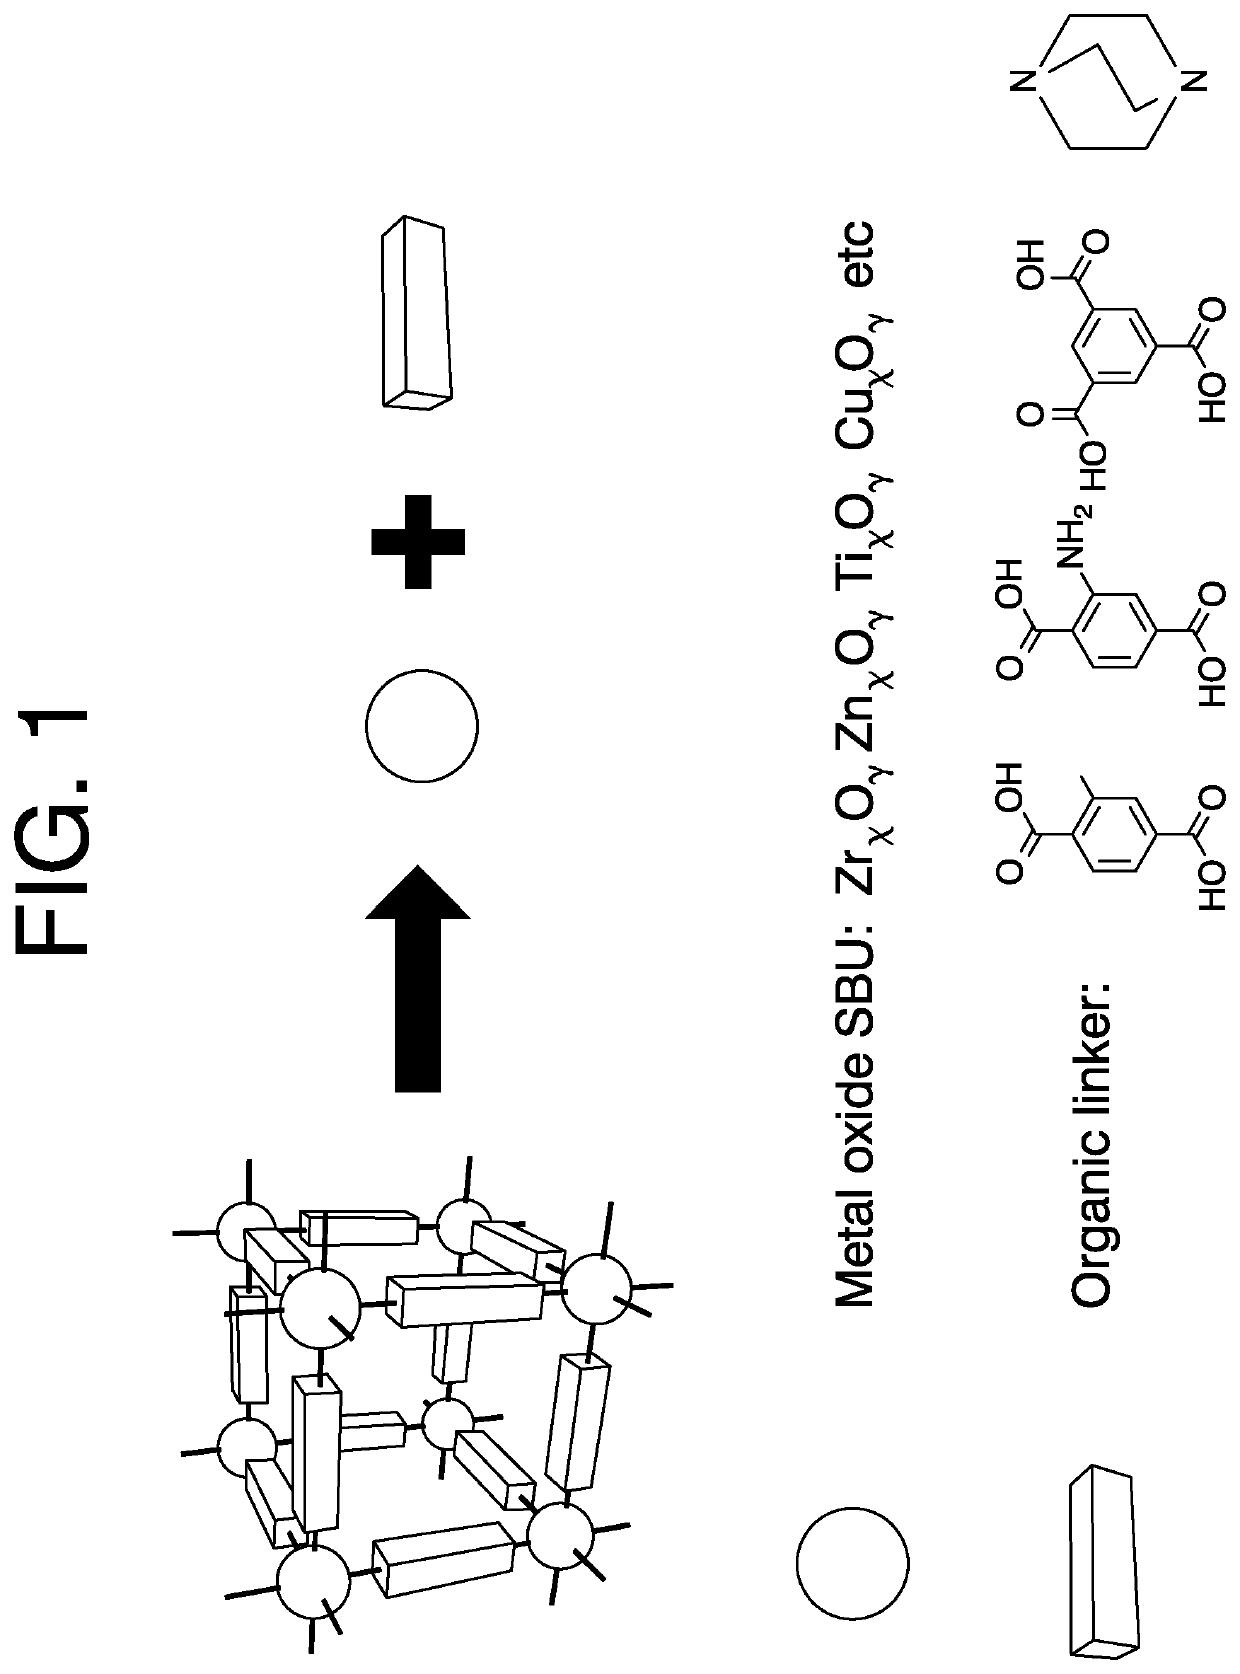 Pyrotechnic smoke obscurants containing metal-organic frameworks and composites thereof